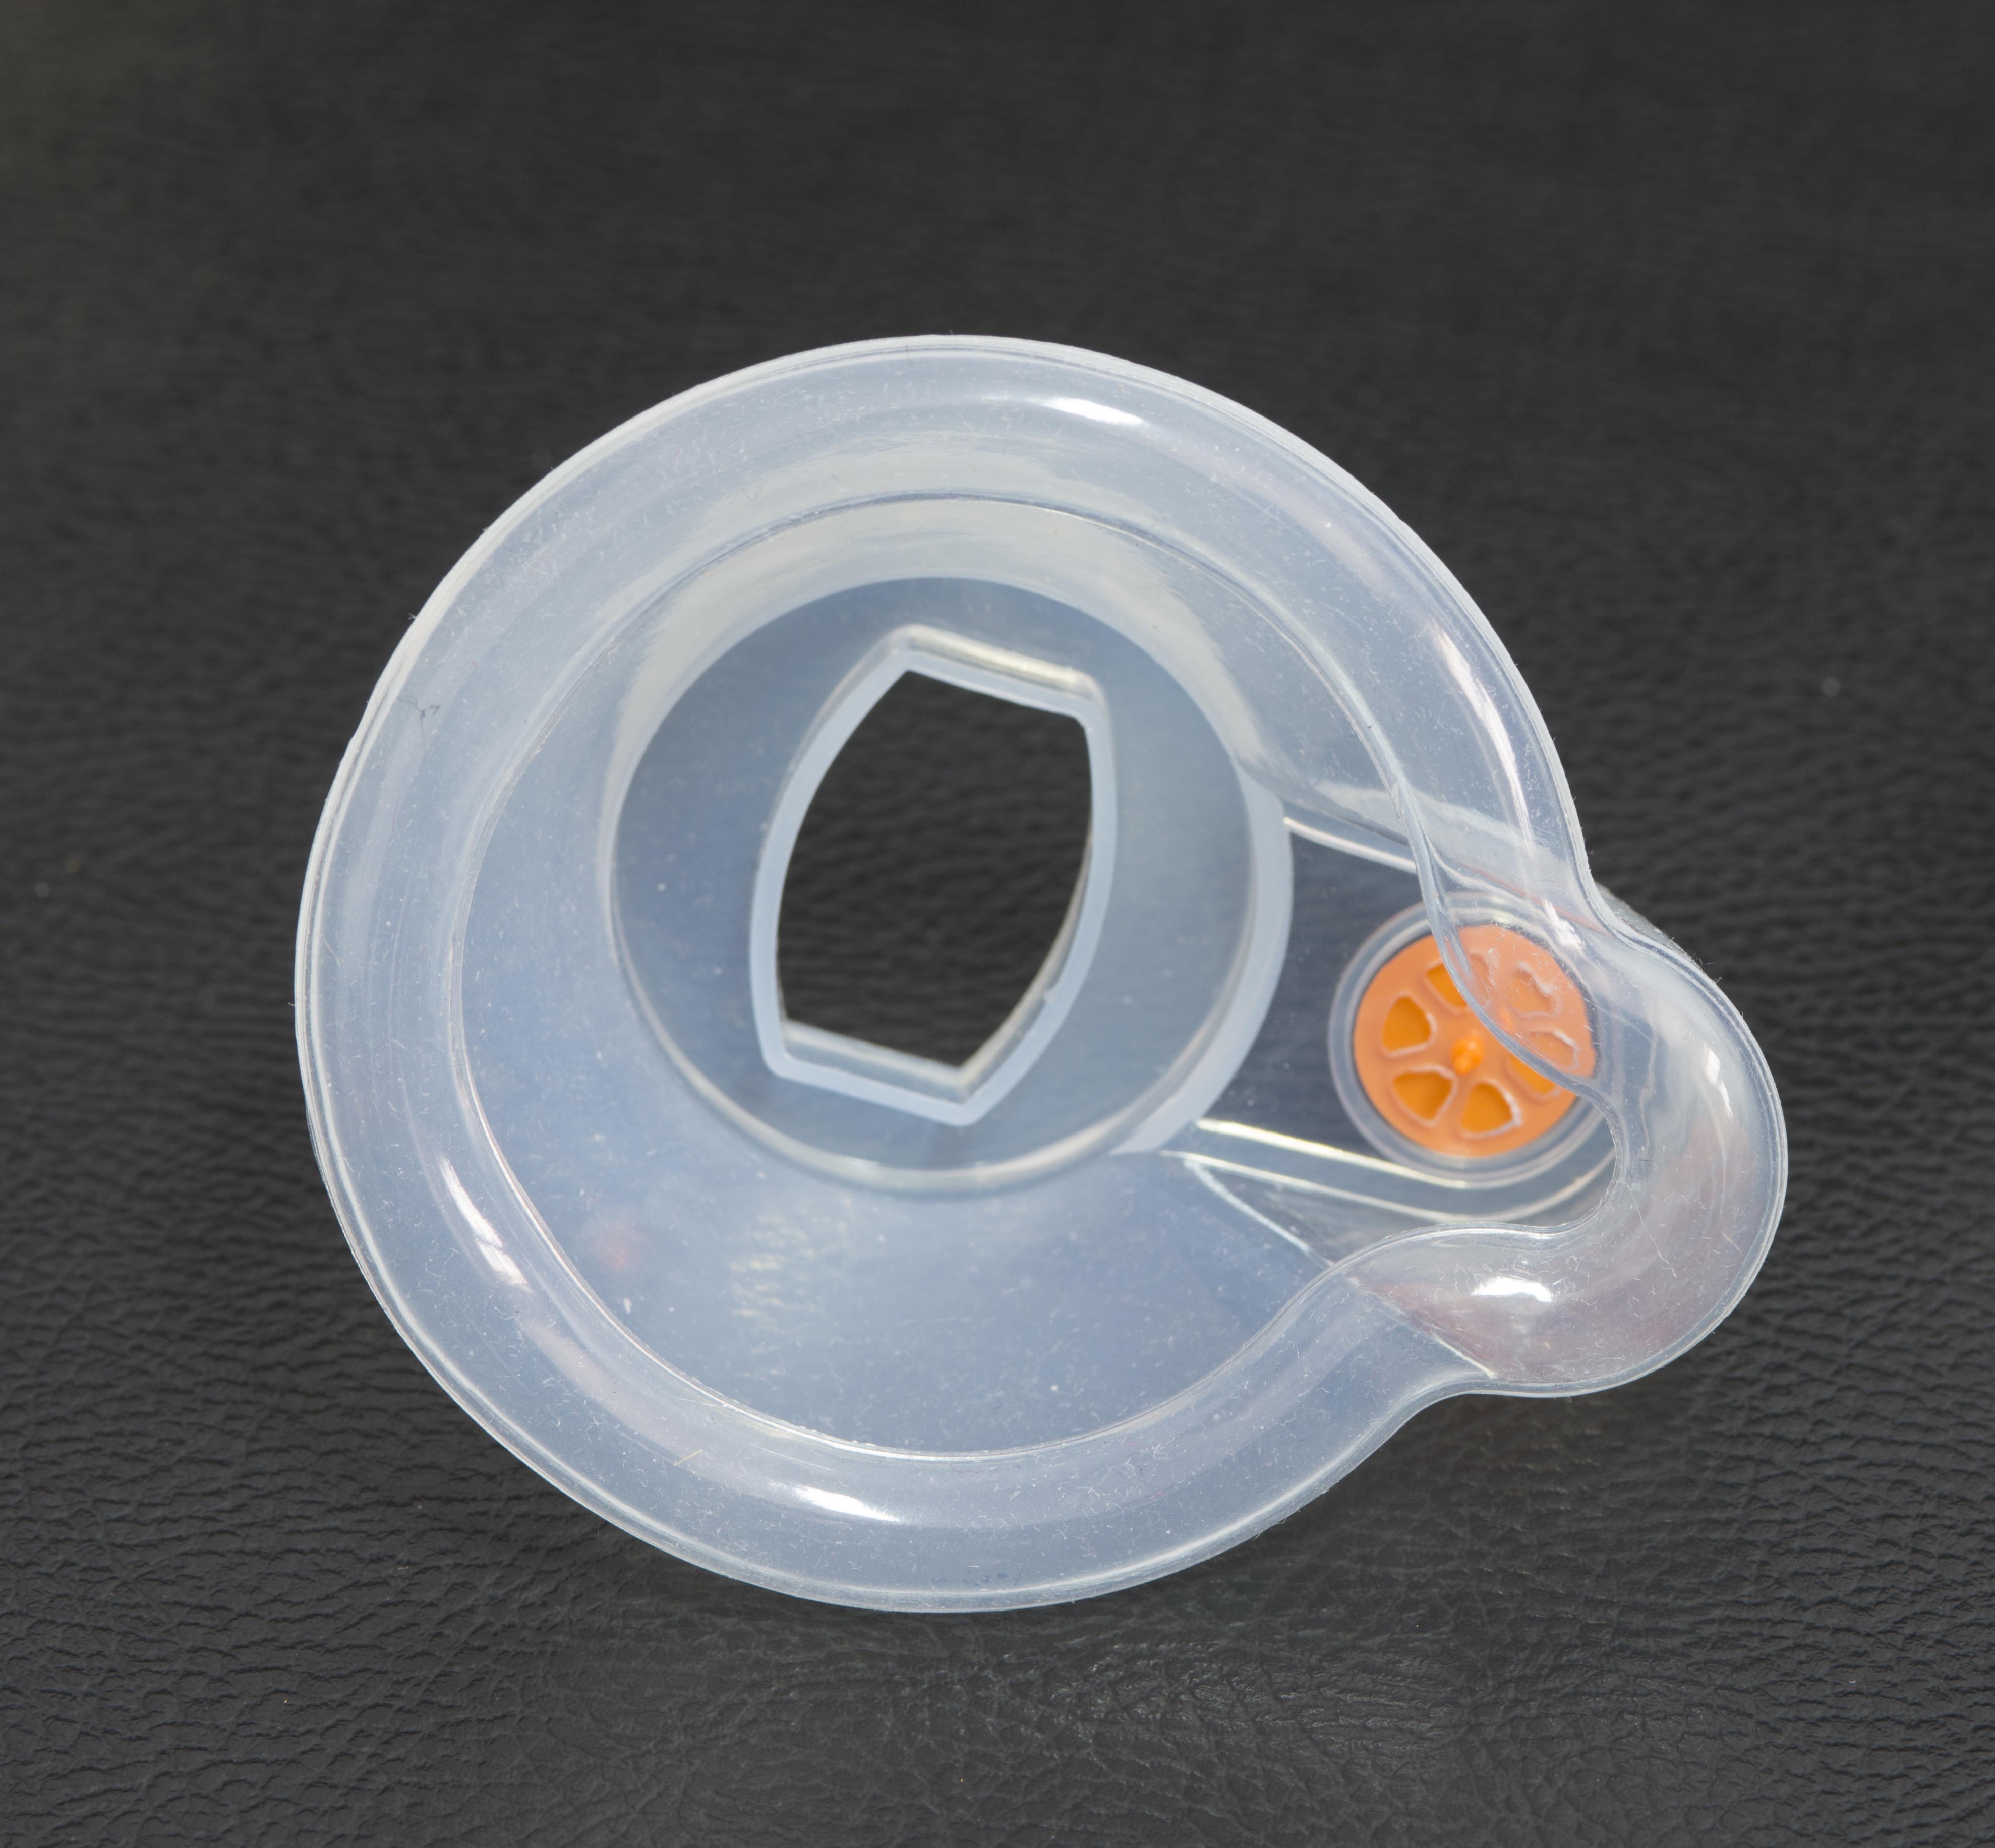 Silicon Mask-Fit Inhaler Mouthpiece